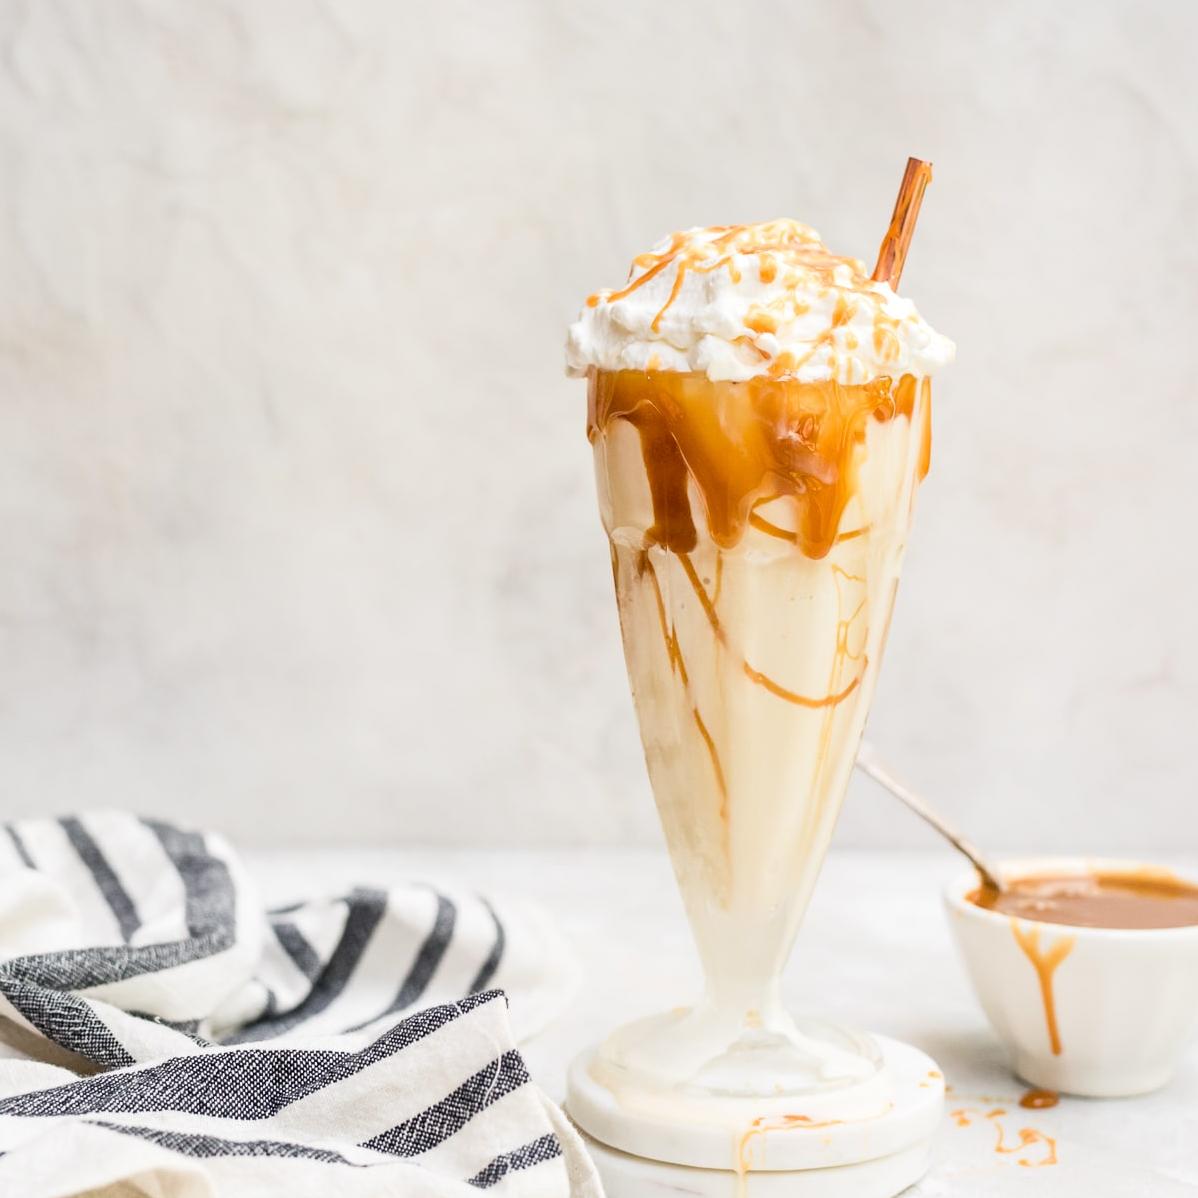  Take your taste buds on a delicious ride with this latte milkshake